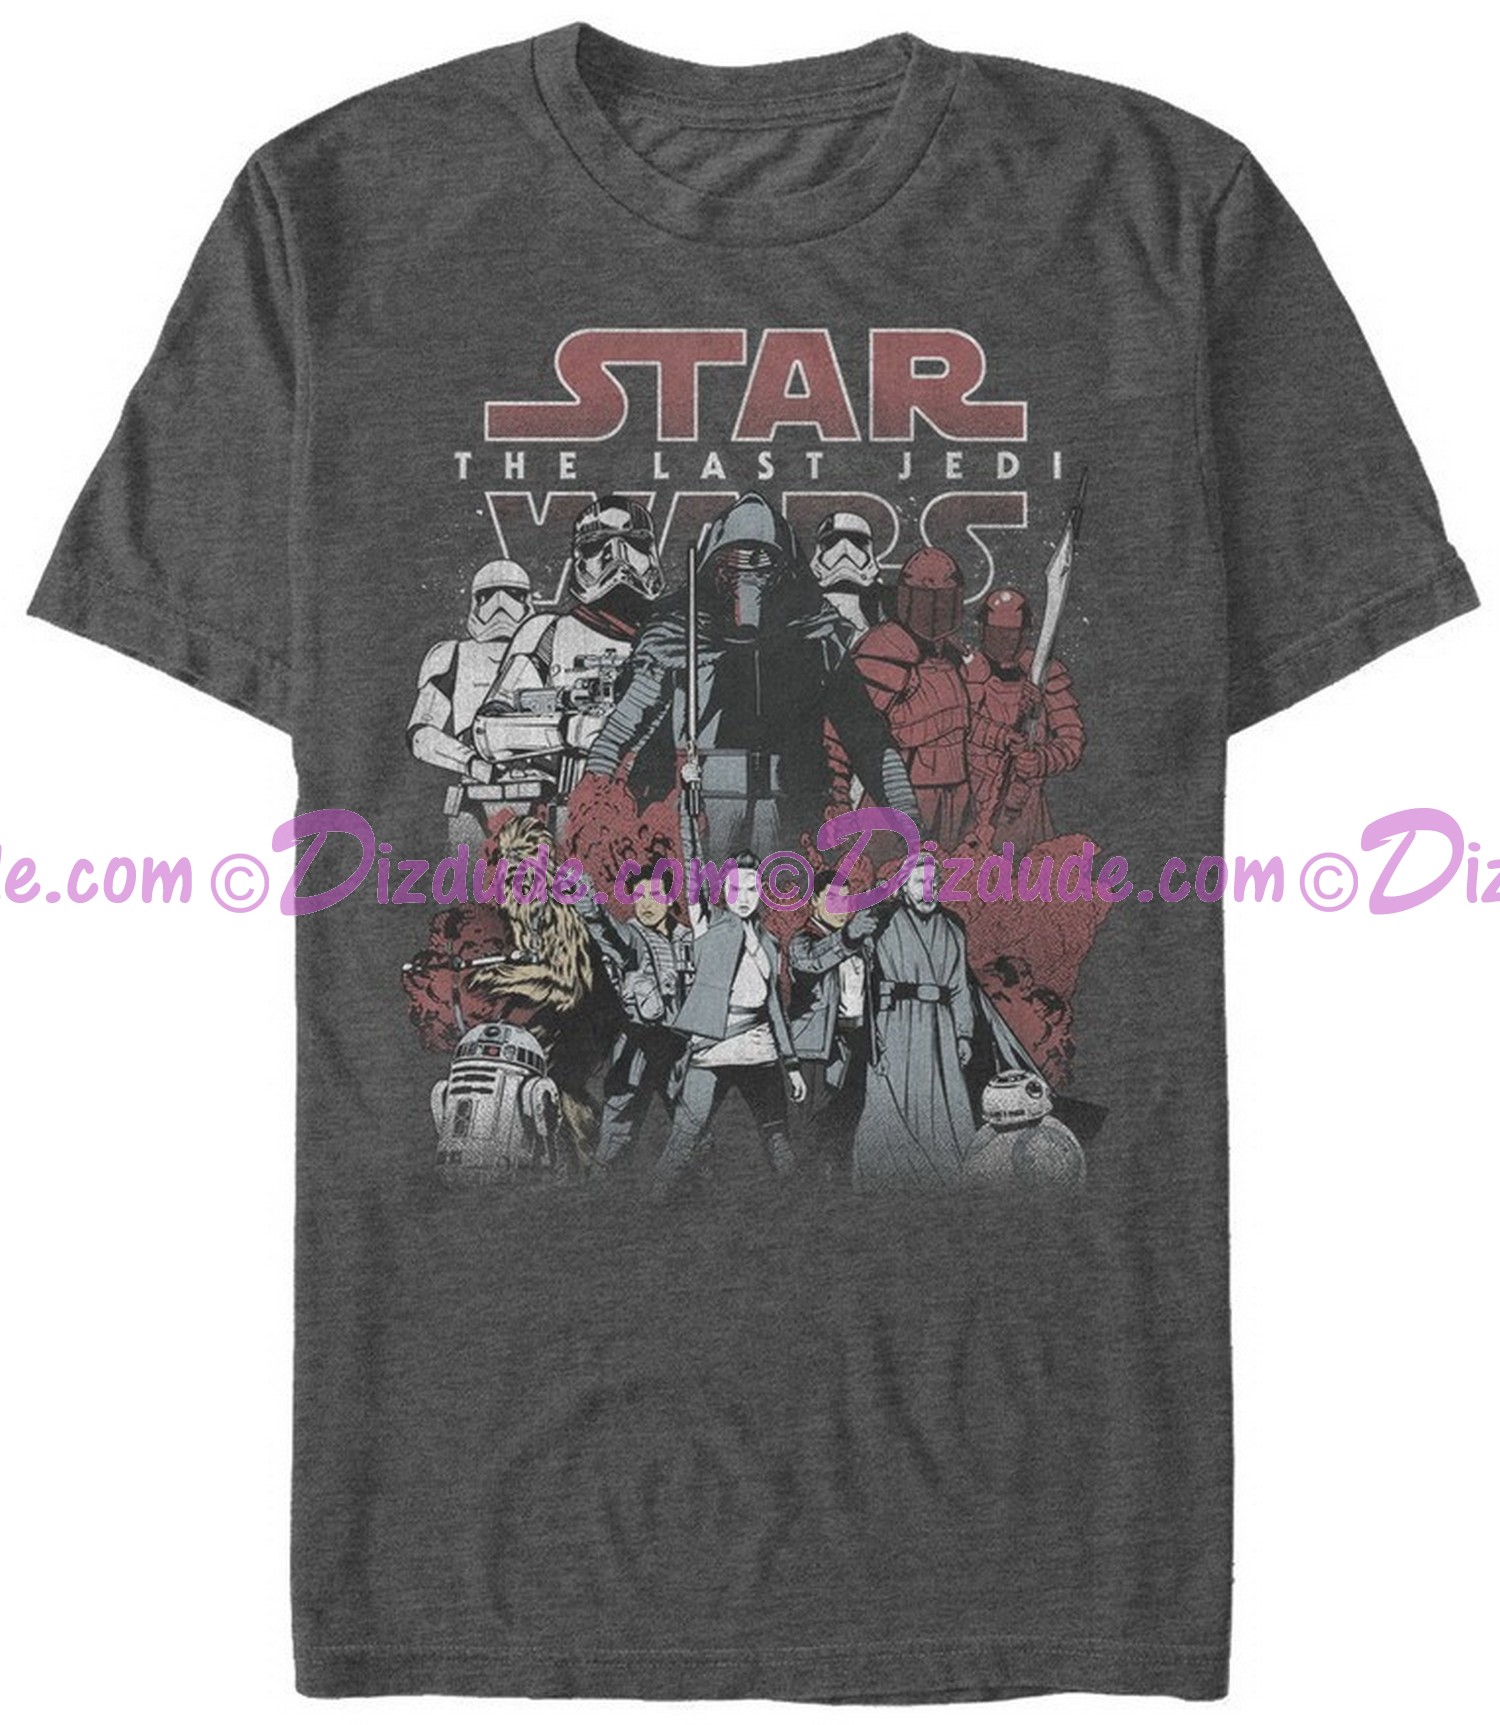 Star Wars: The Last Jedi Character Group Picture Adult T-Shirt (T-Shirt, Tshirt, T shirt or Tee) © Dizdude.com